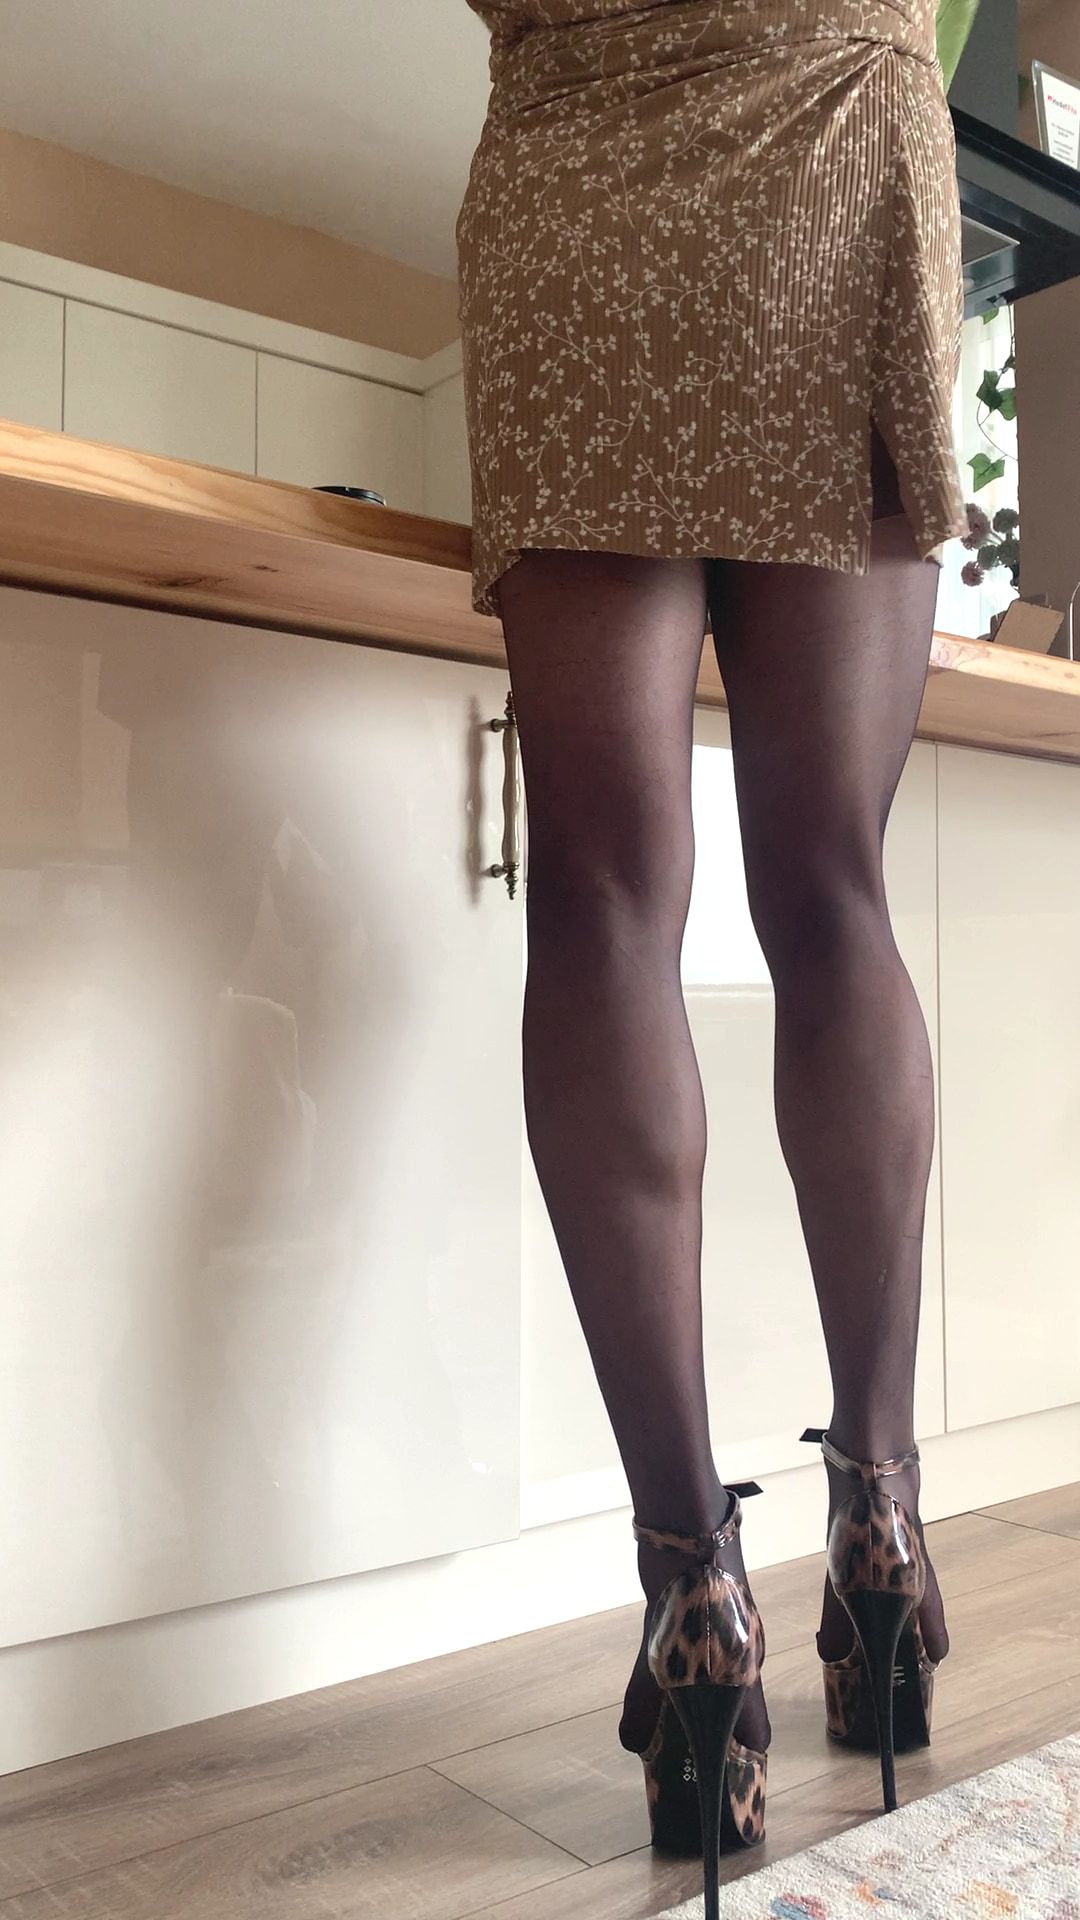 Sexy Housewife #36